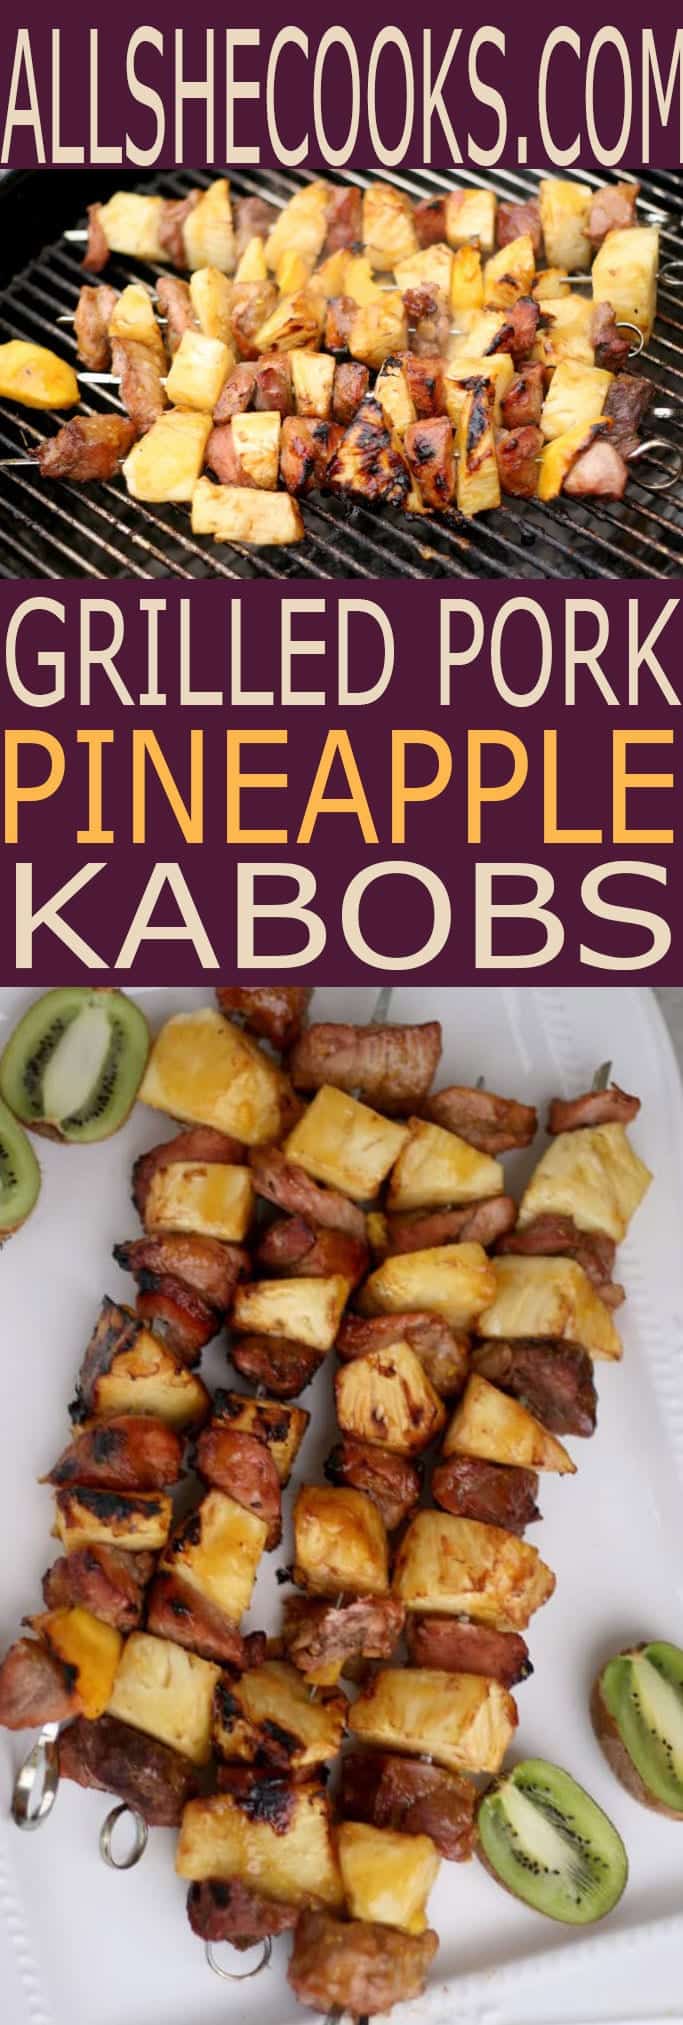 This easy tropical fruit grilling recipe will have you enjoying these sweet Grilled Pork Pineapple Kabobs in no time at all. Marinate overnight.